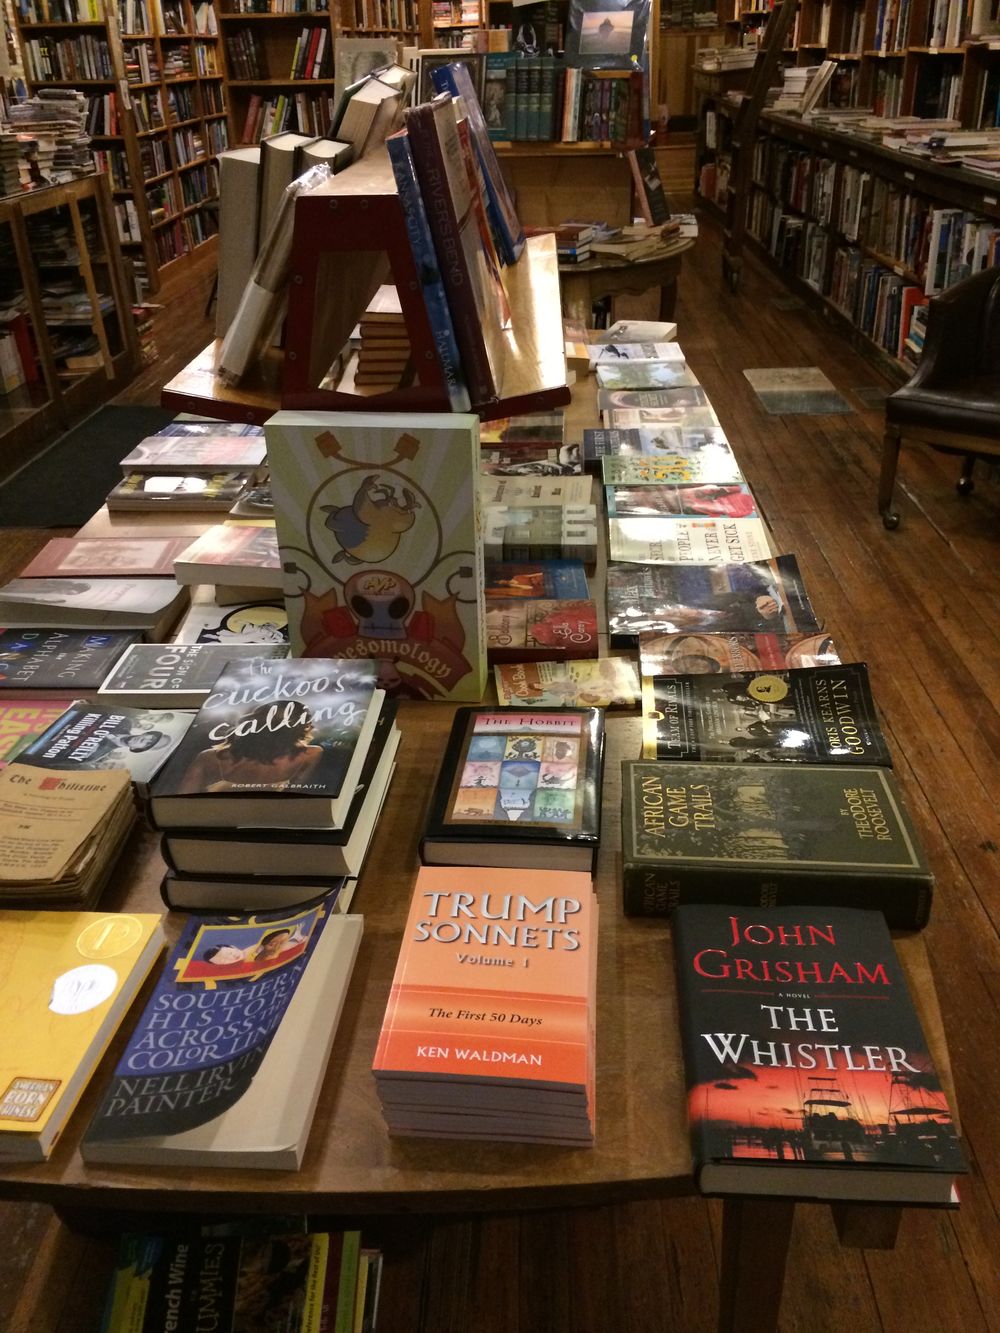 Photo taken by Tom Wayne, co-owner of Prospero's Books in Kansas City. Tom, along with co-owner, Will Leathem, have been most supportive of this project (and have sold plenty of books and hosted a pair of events).  One hope: more bookstores like Prospero's!